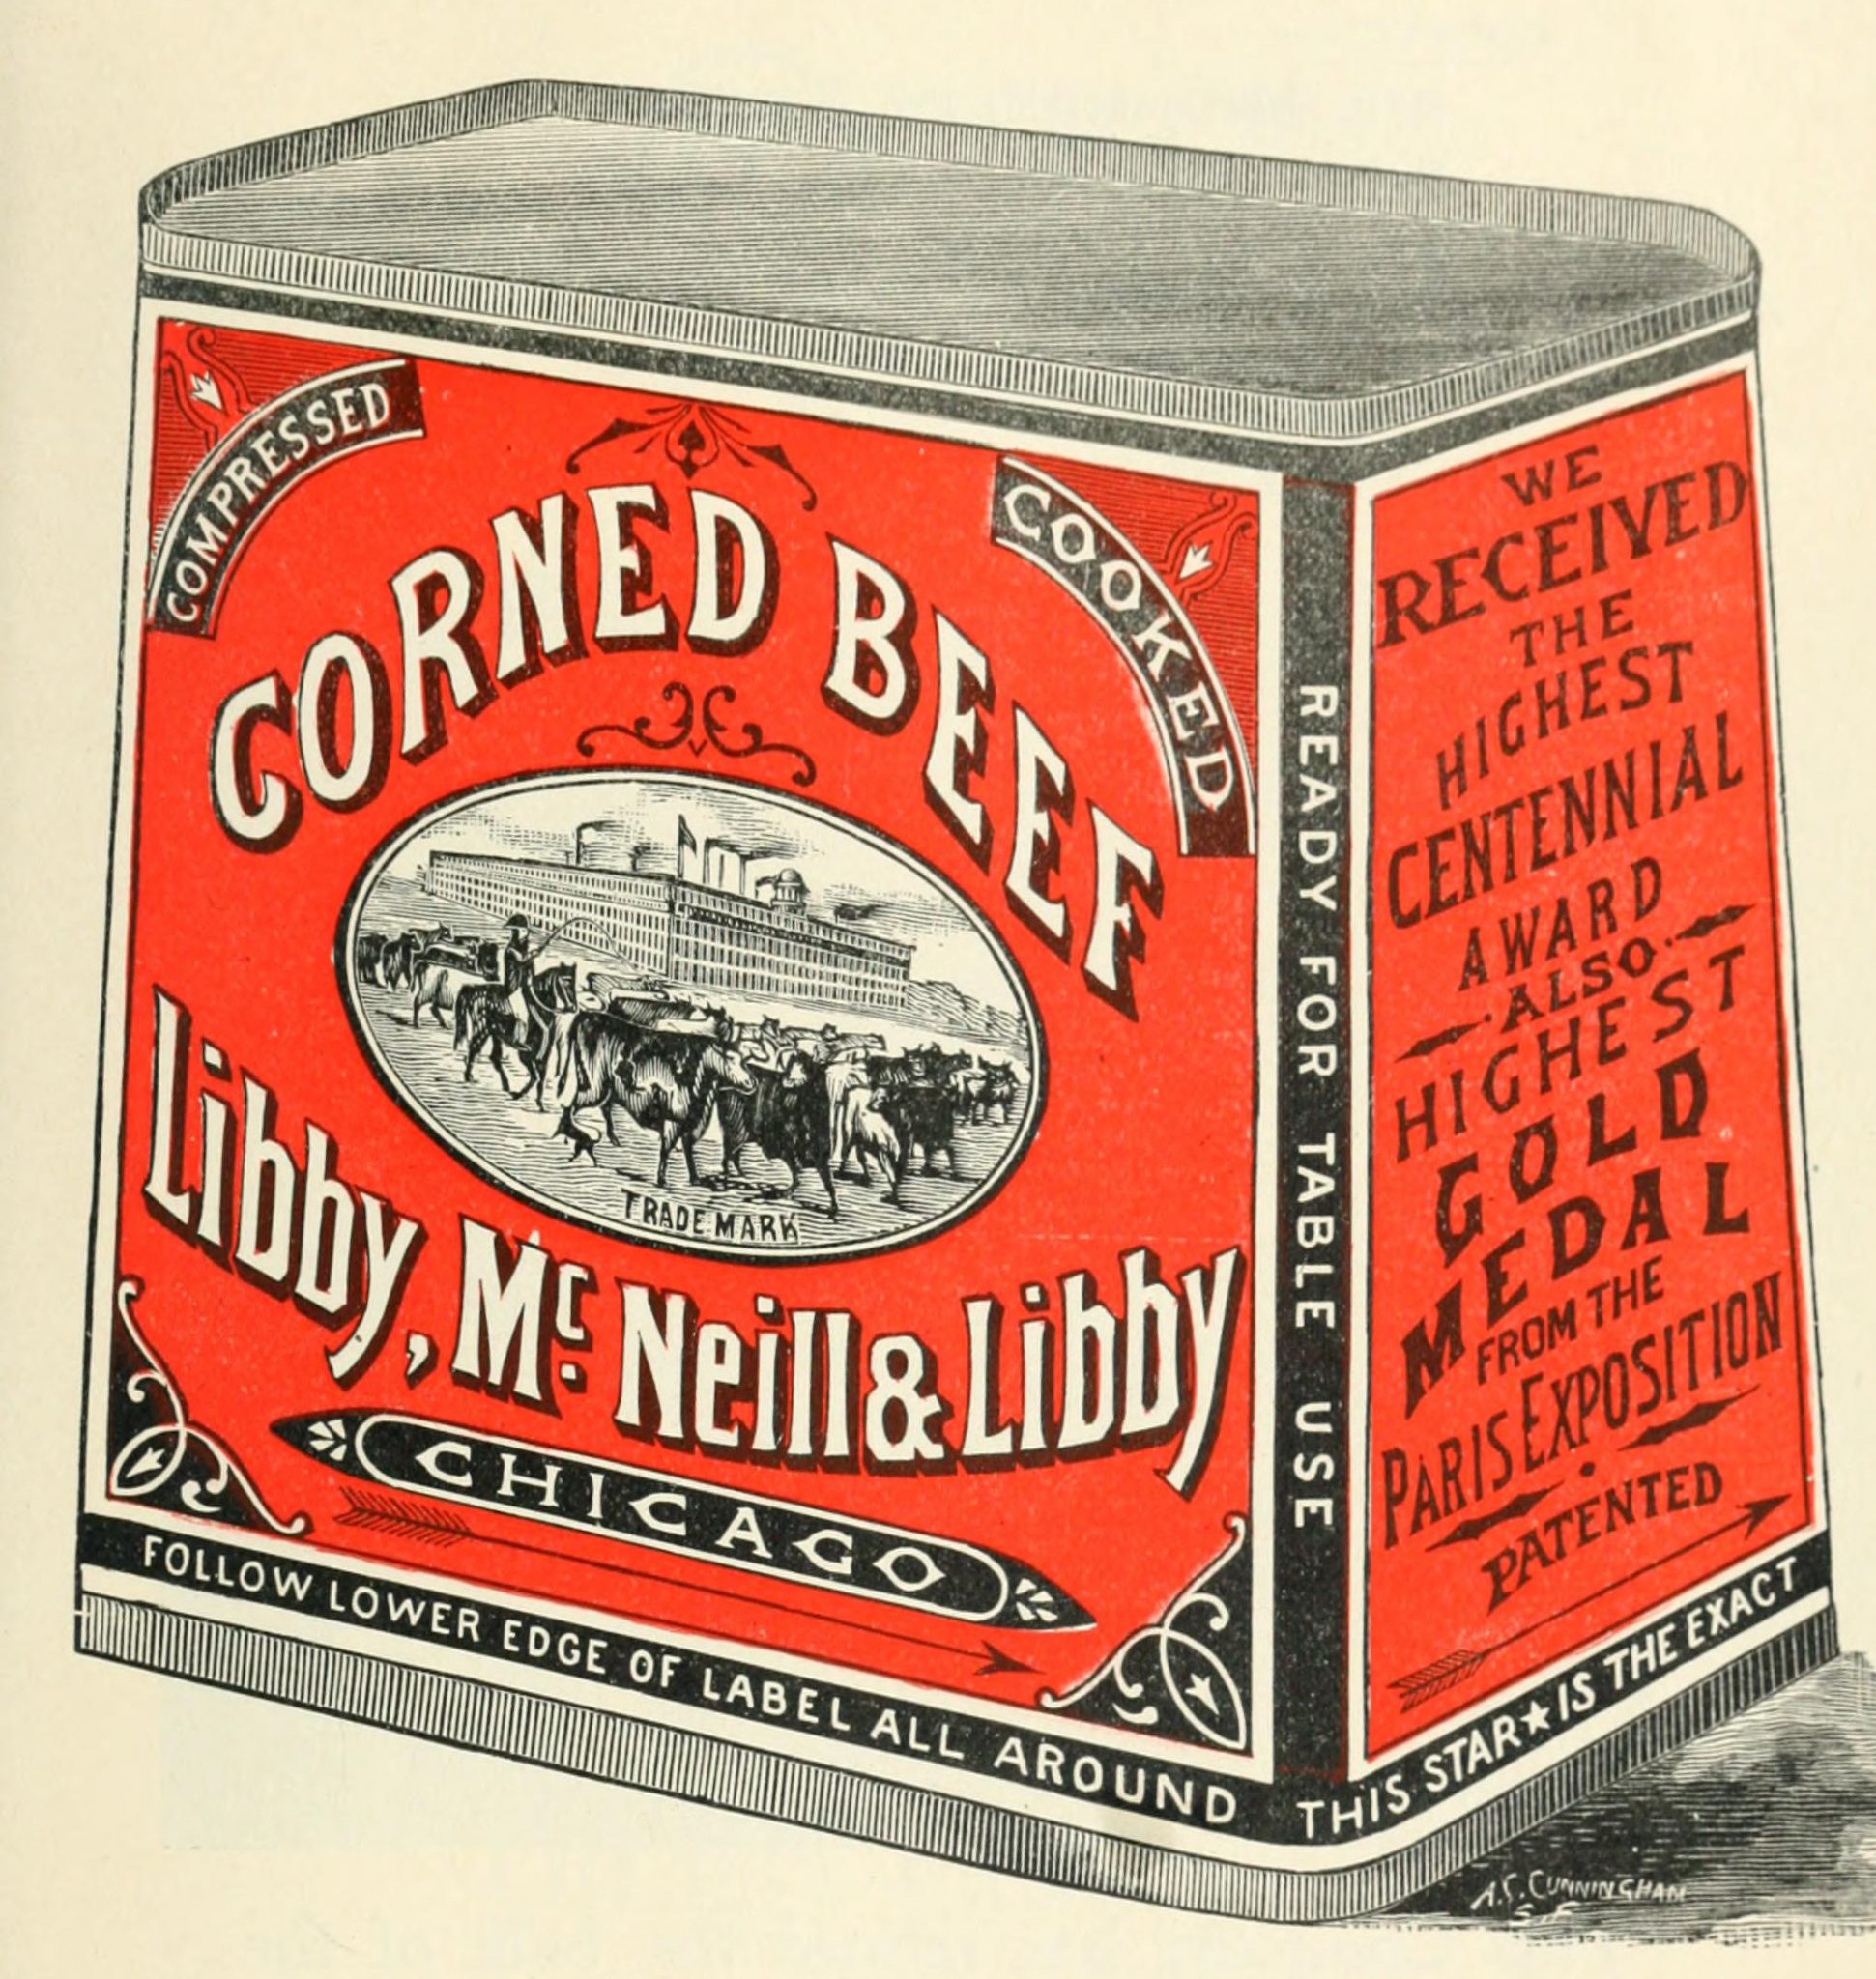 This is a free vintage color illustration of a can of corned beef